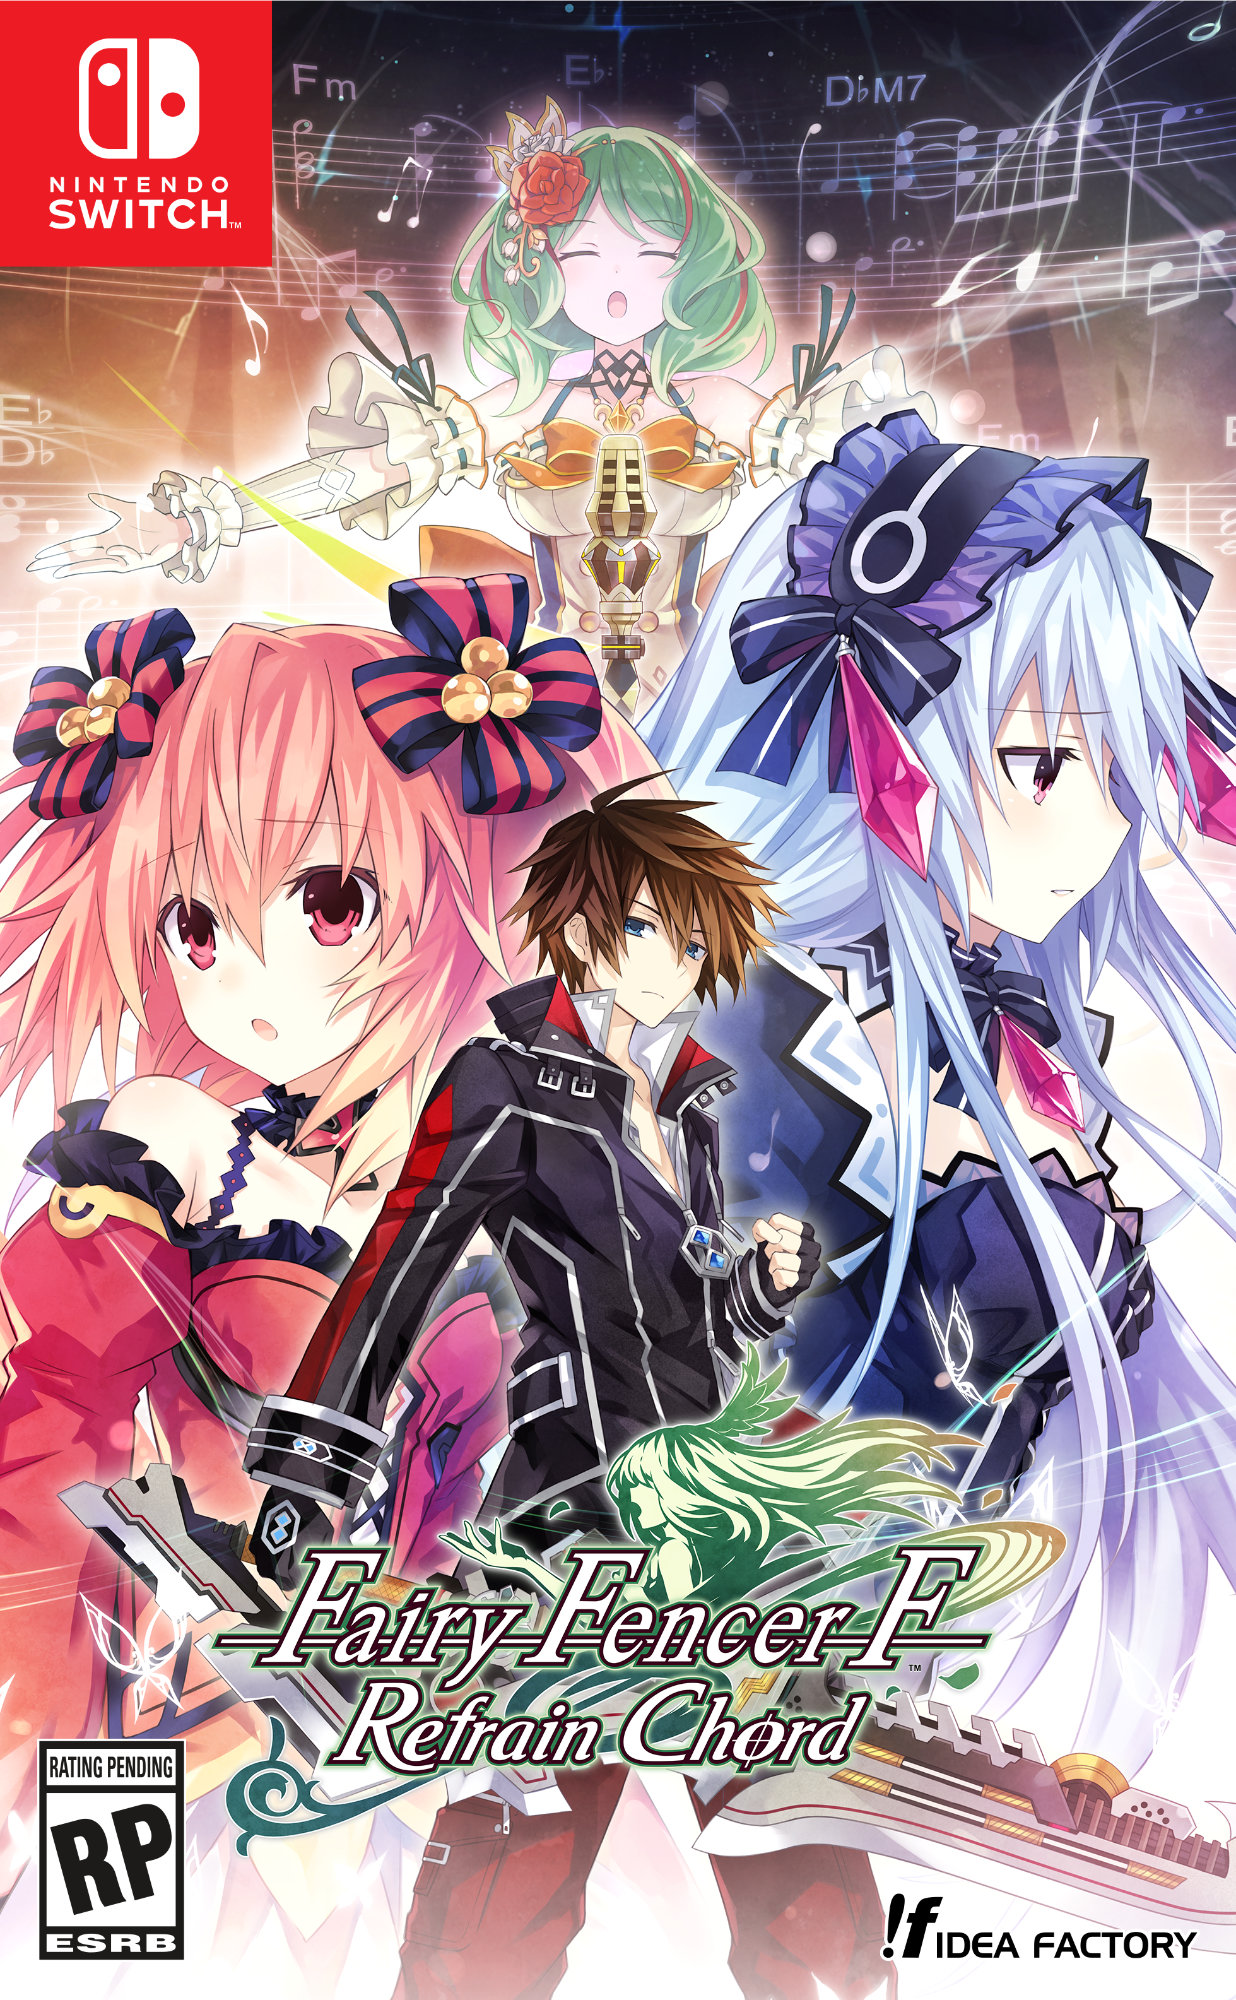 Fairy Fencer F Refrain Chord Cover Art US Switch